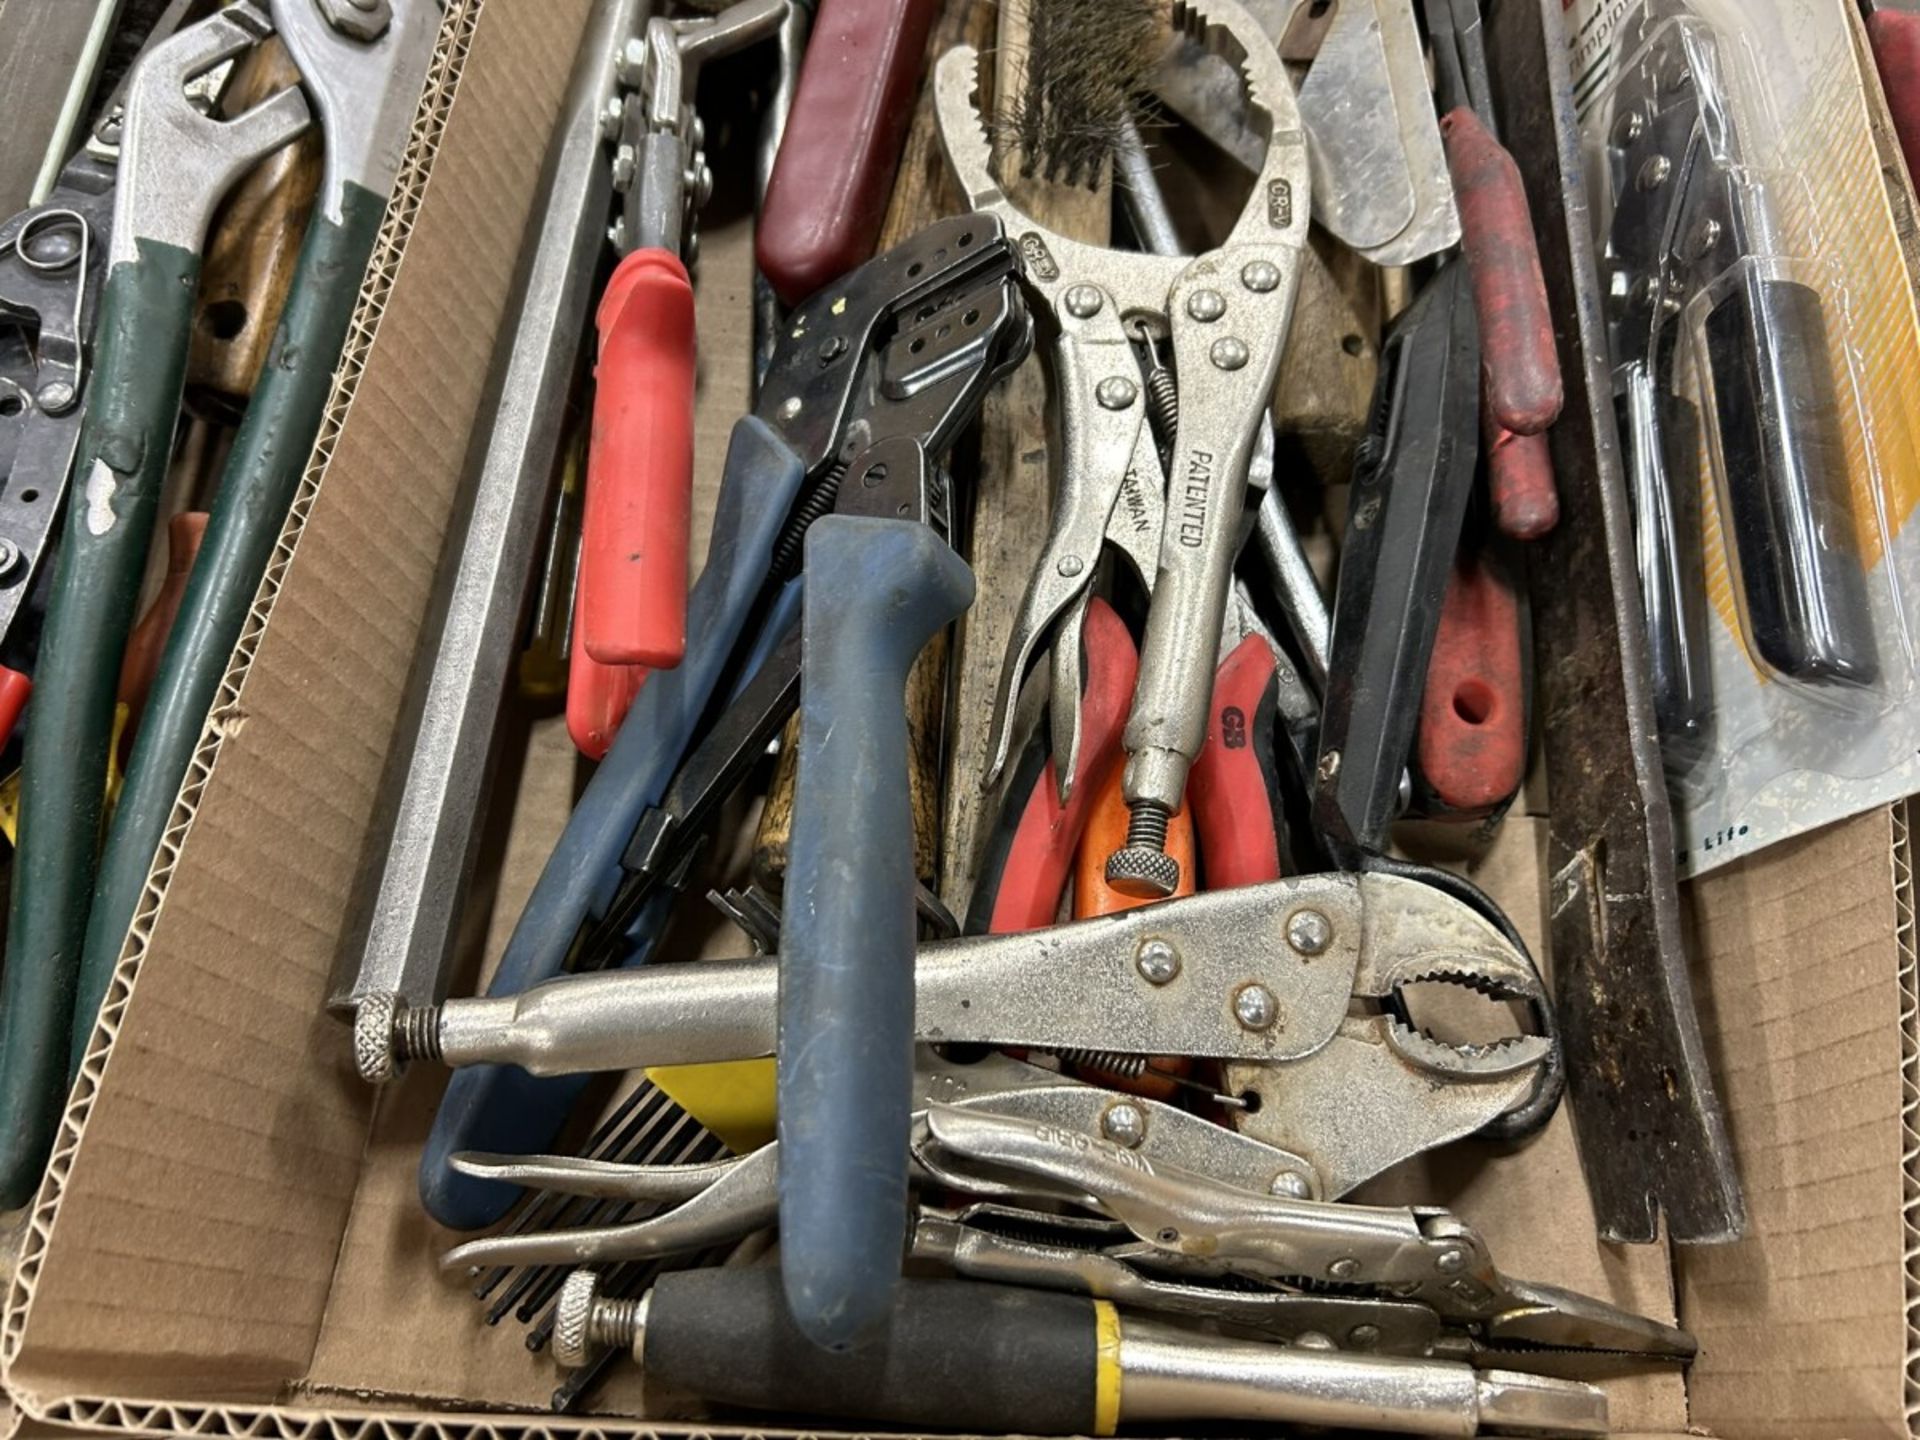 L/O ASSORTED HAND TOOLS-VICE GRIP, HAMMERS, OIL FILTER WRENCH ETC. - Image 3 of 3